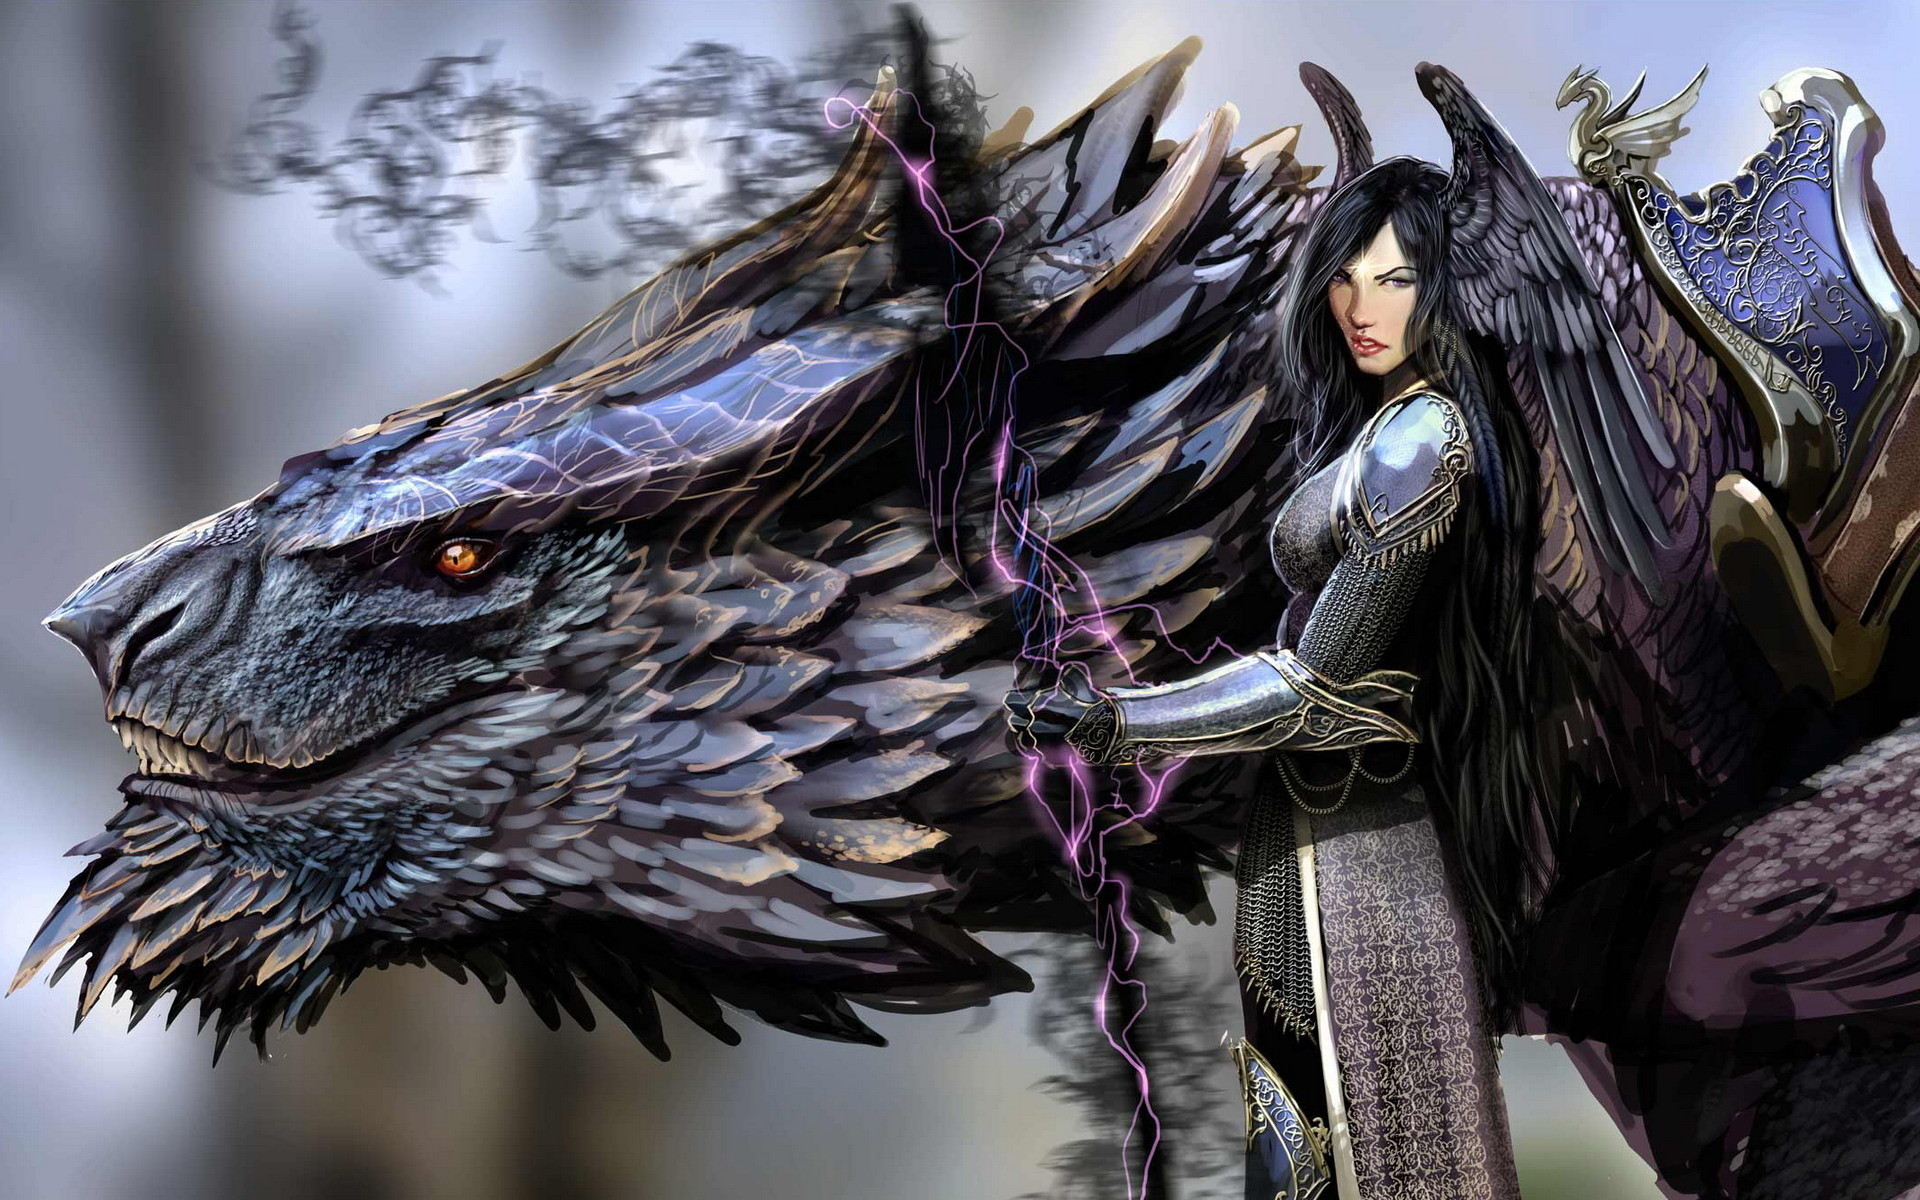 Amazing Dark Angel And Black Dragon Anime HD Wallpaper Picture Image